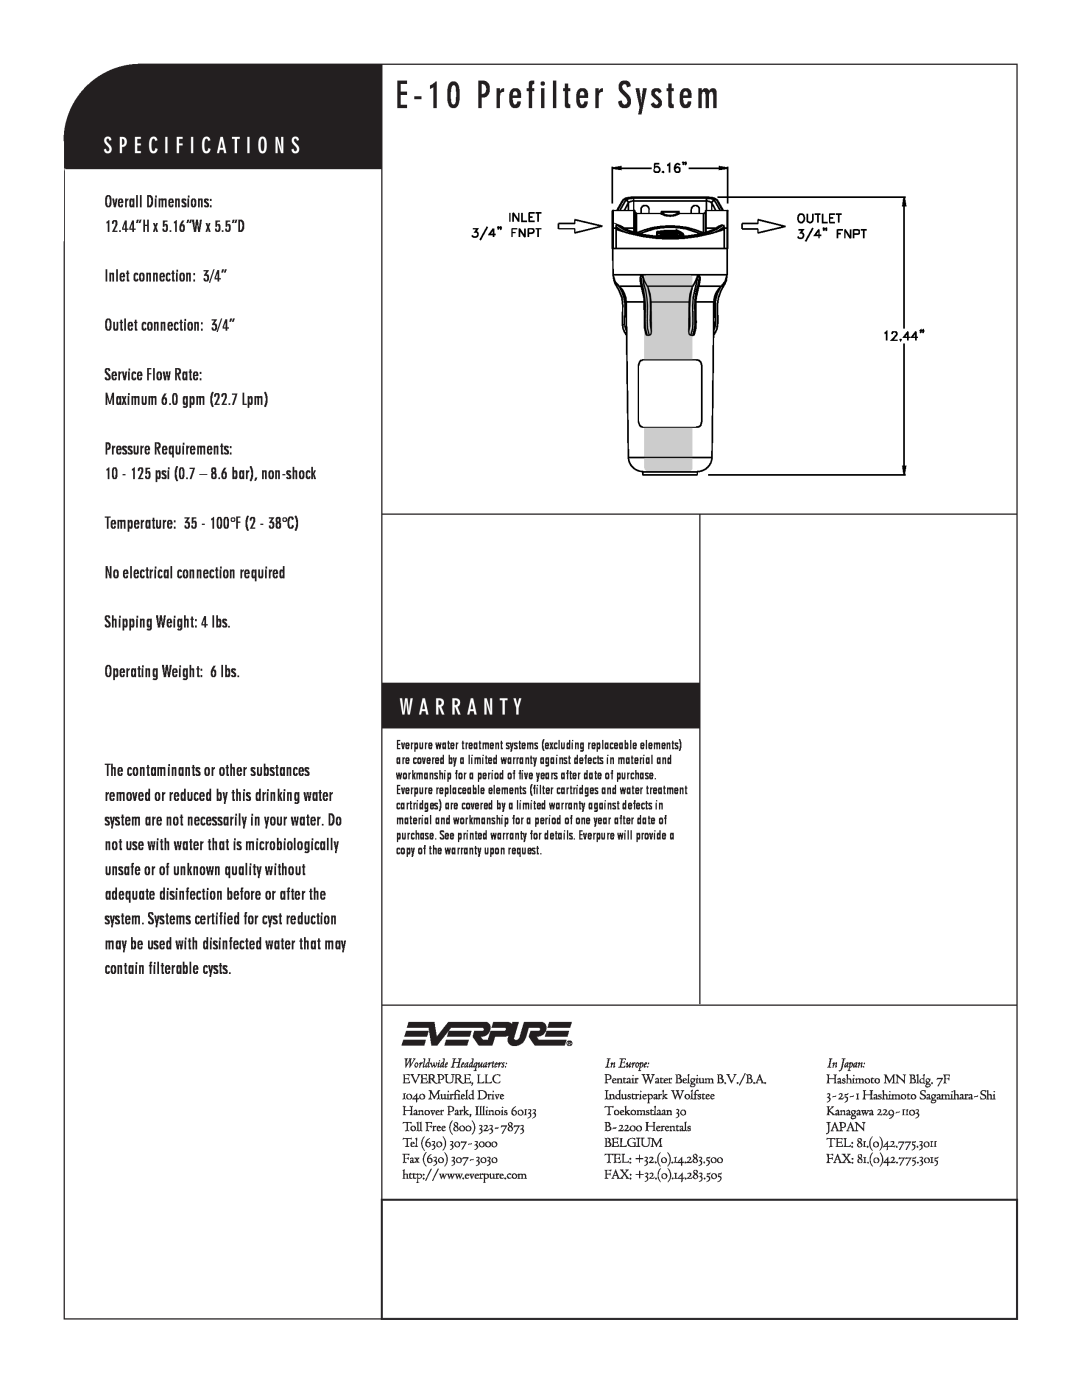 Everpure EV9795-80 manual E - 10 Prefilter System, Inlet connection 3/4” Outlet connection 3/4” Service Flow Rate 